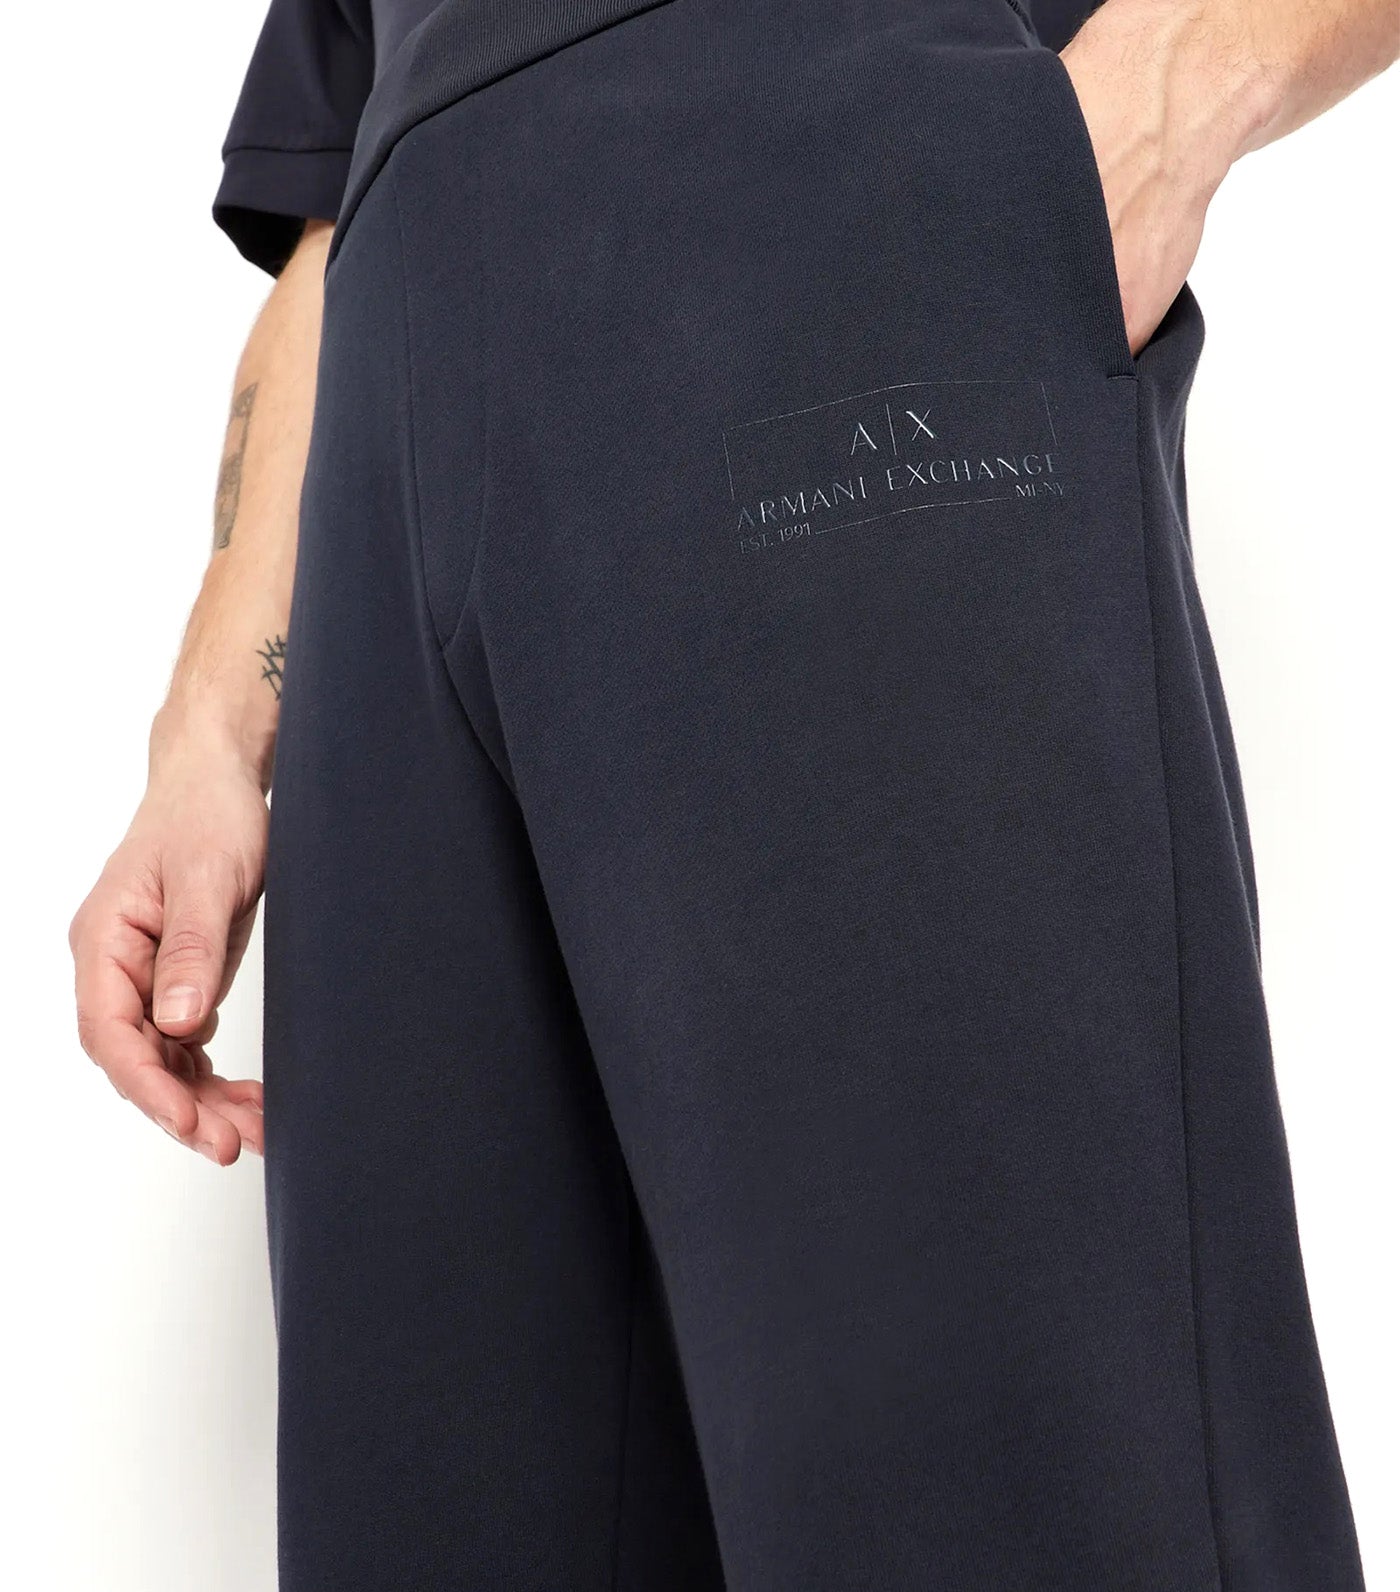 Organic French Terry Cotton Jogger Sweatpants Navy